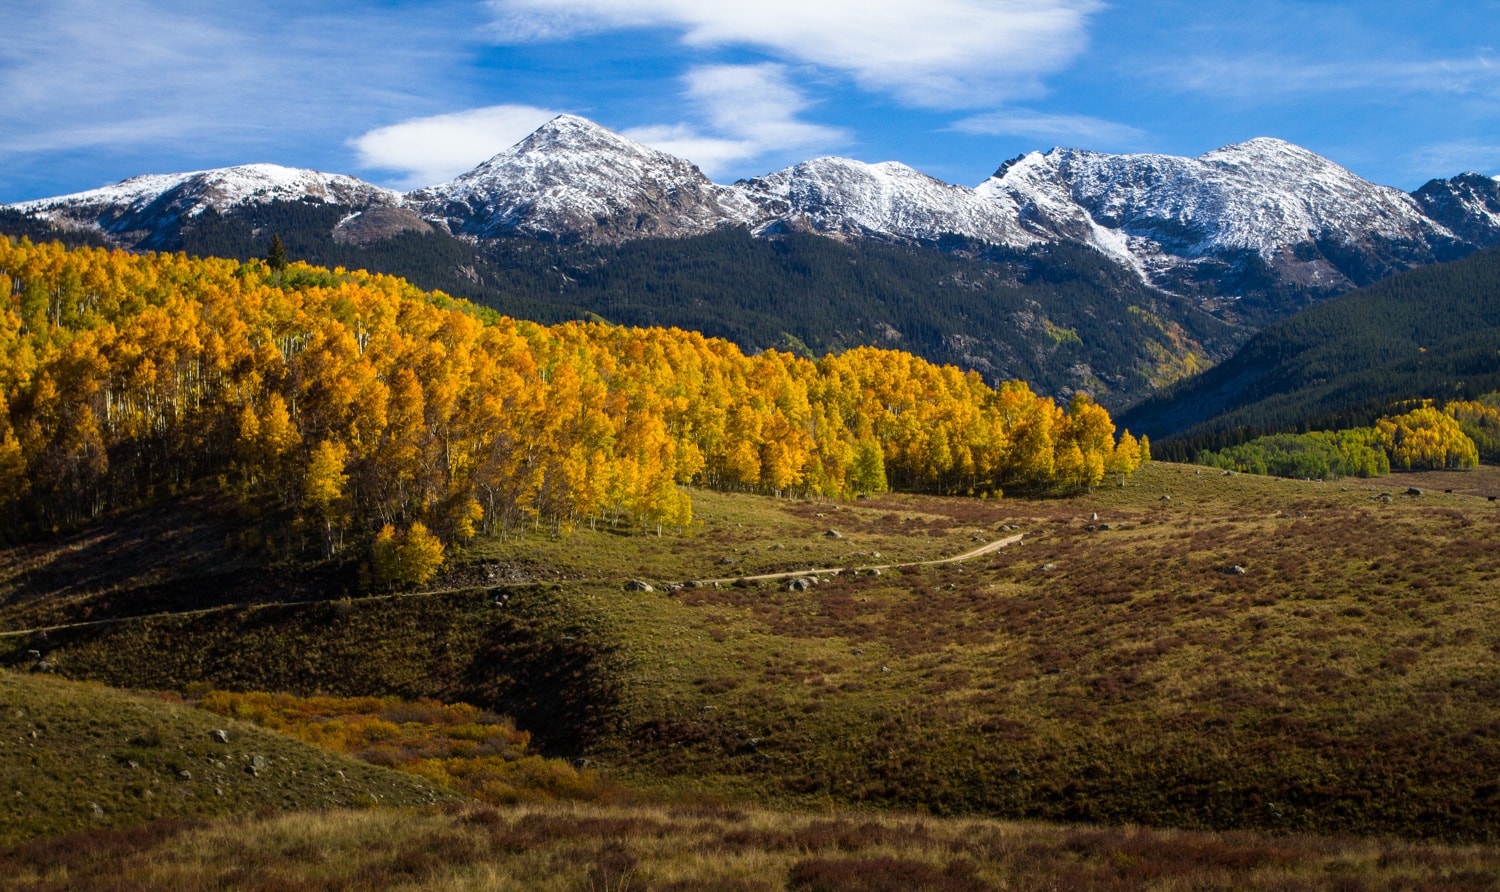 Landscape photo of tall snow-dusted Rockies peaks with large grove of golden aspen trees a its base in Colorado